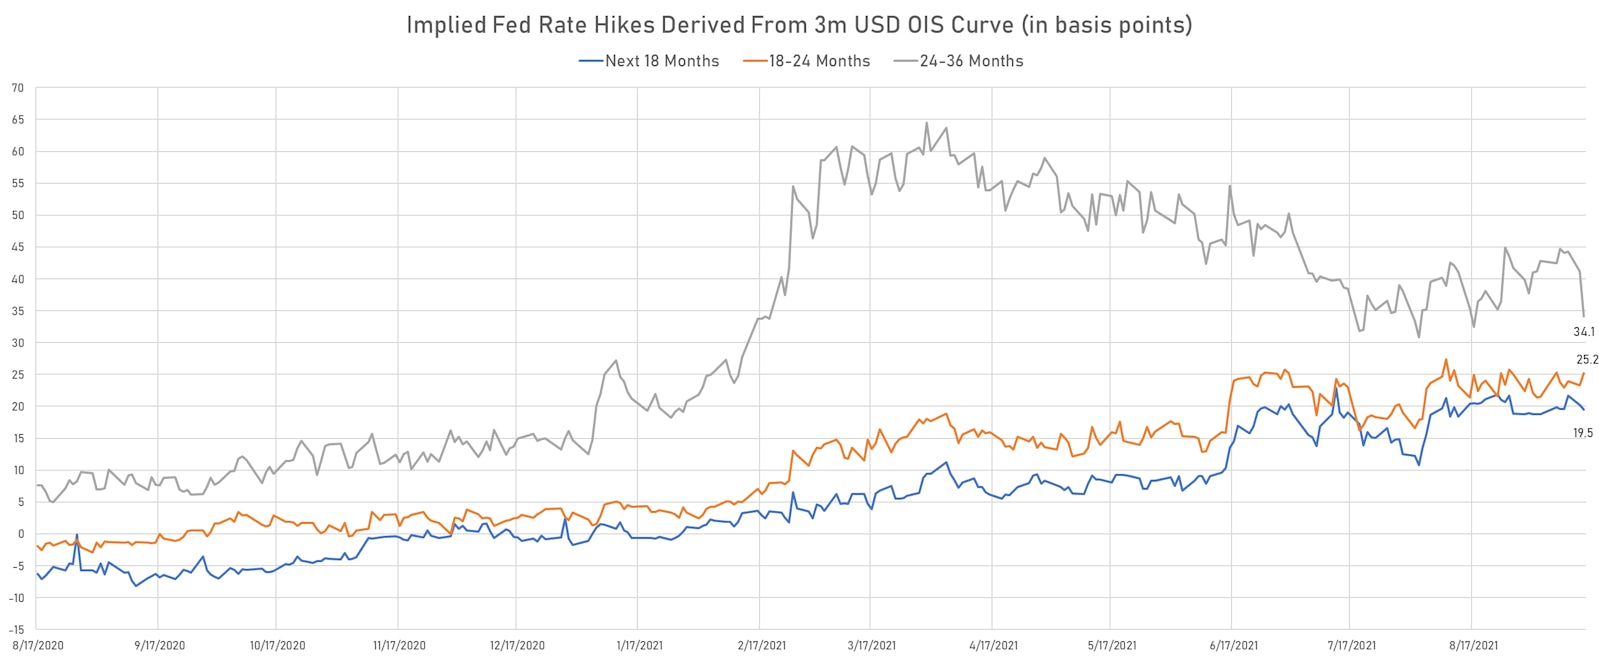 Implied Fed Hikes Derived From The 3-Month USD OIS Forward Curve | Sources: ϕpost, Refinitiv data